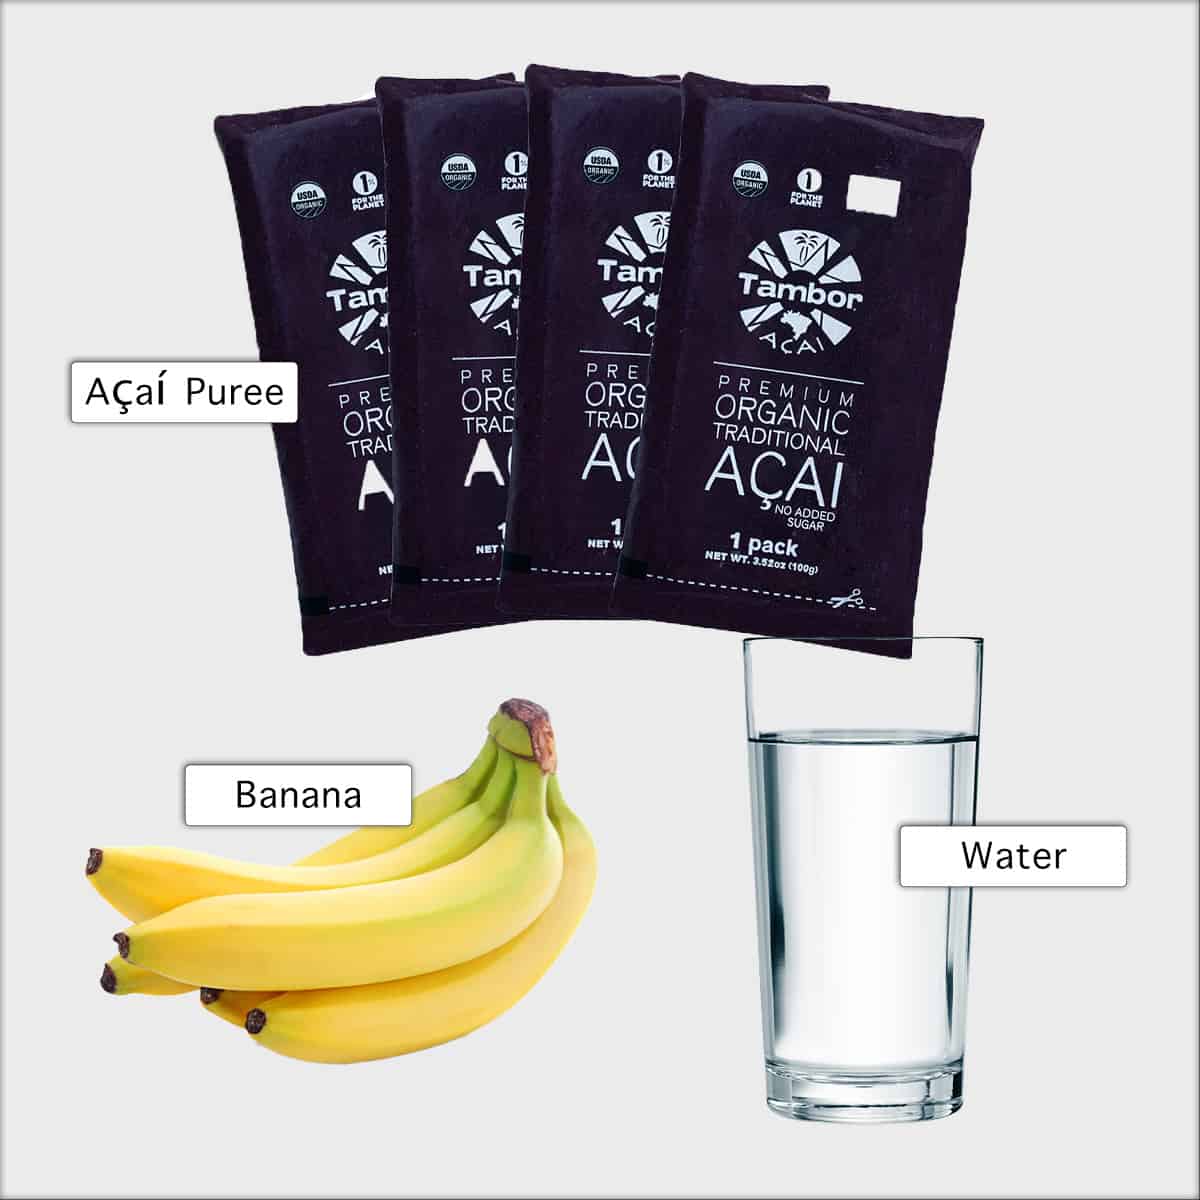 acai bowl ingredients containing four acai packages a bunch of bananas and a glass of water on a white background